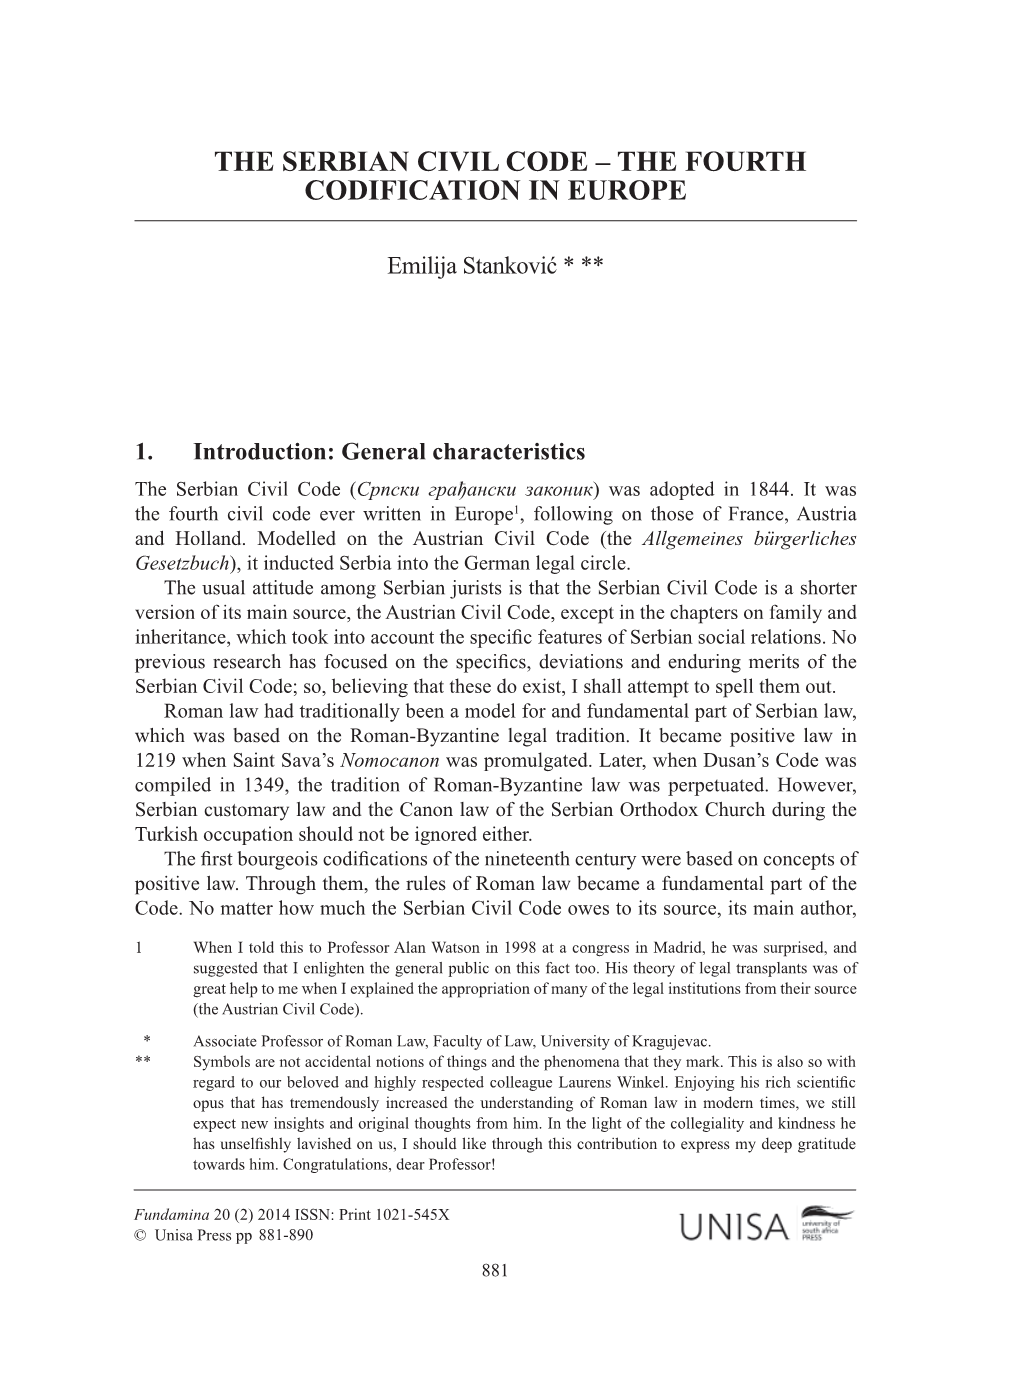 The Serbian Civil Code – the Fourth Codification in Europe